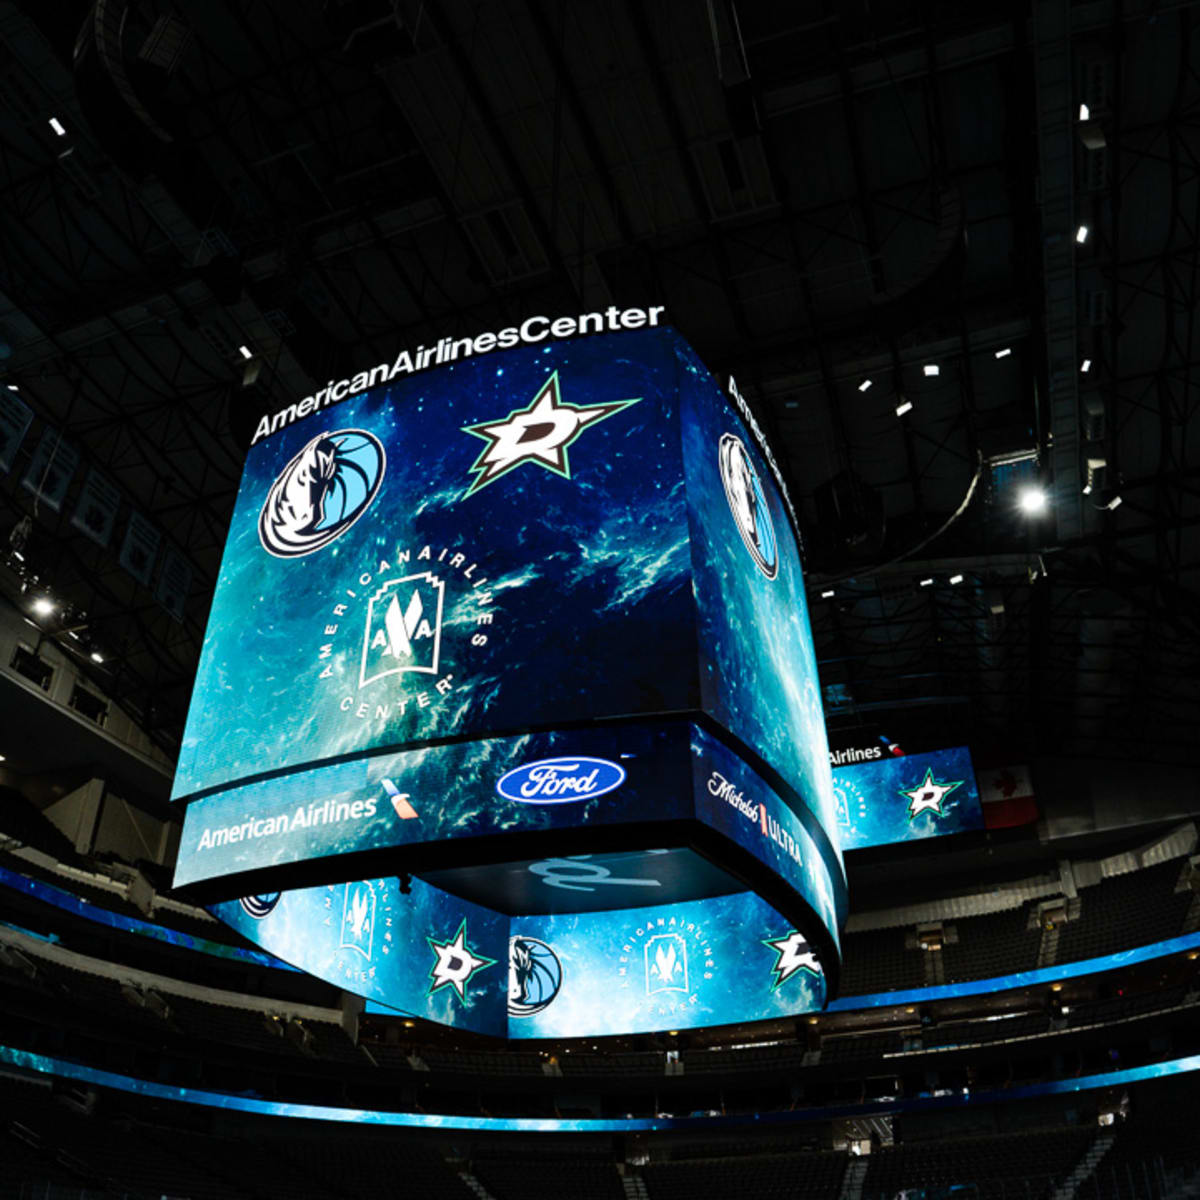 Dallas Mavericks Banners In The American Airlines Center